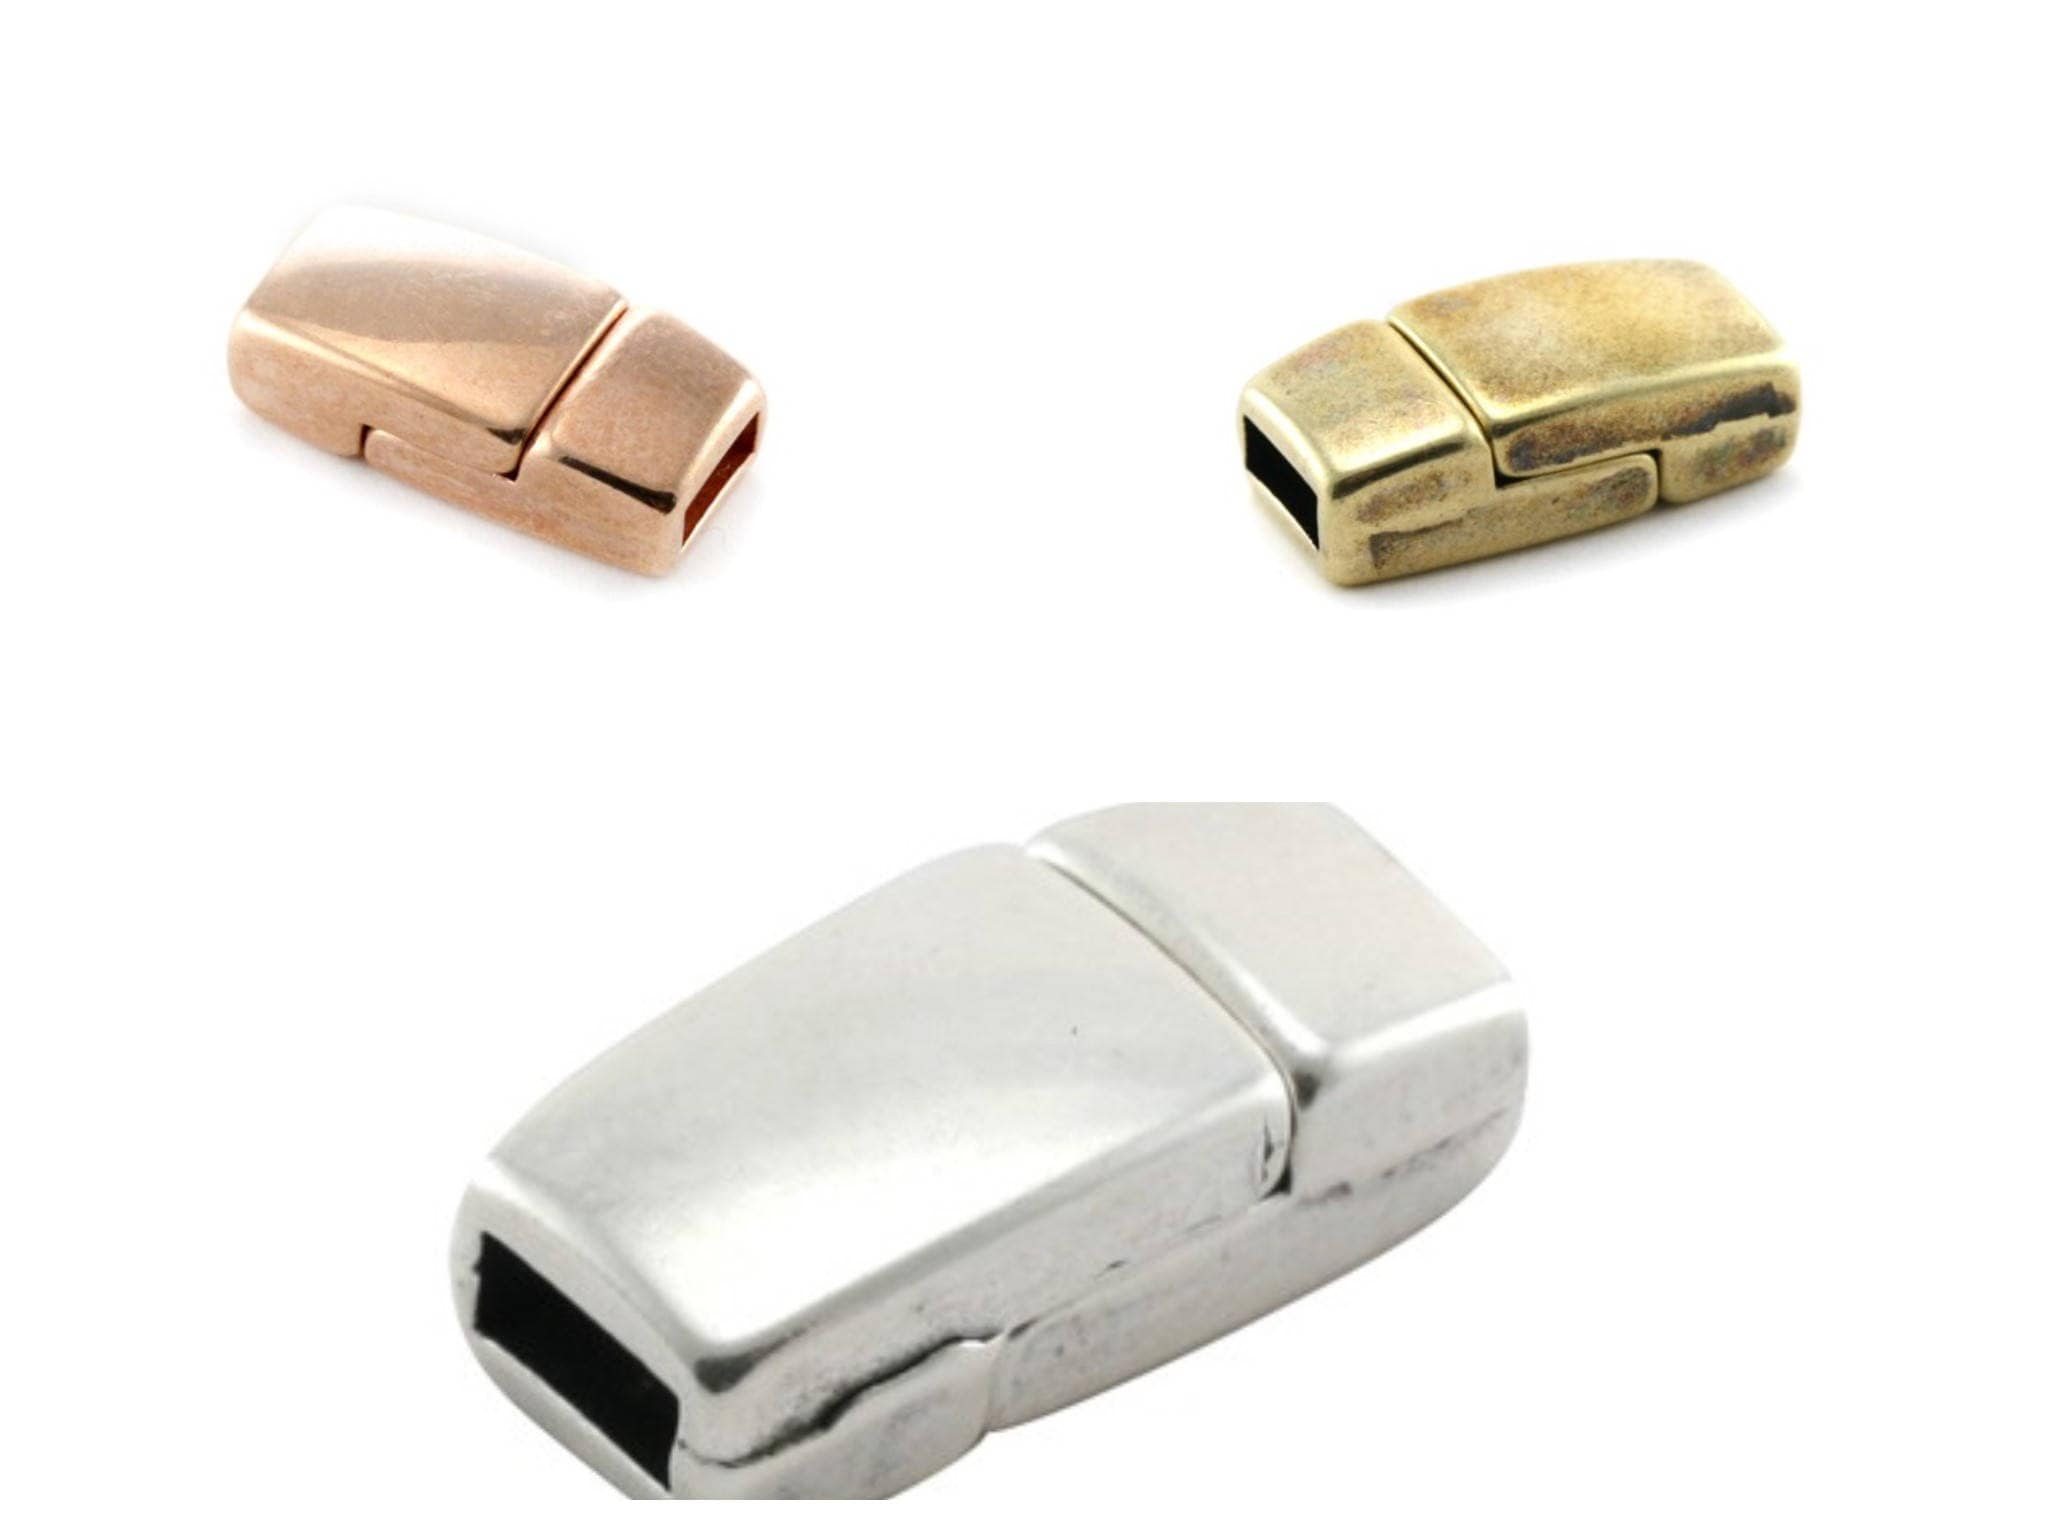 5pcs Stainless Steel Magnetic Clasps for Leather Bracelet , Magnet Clasp  Closure , DIY Accessories for Jewelry Making Findings Supplies 